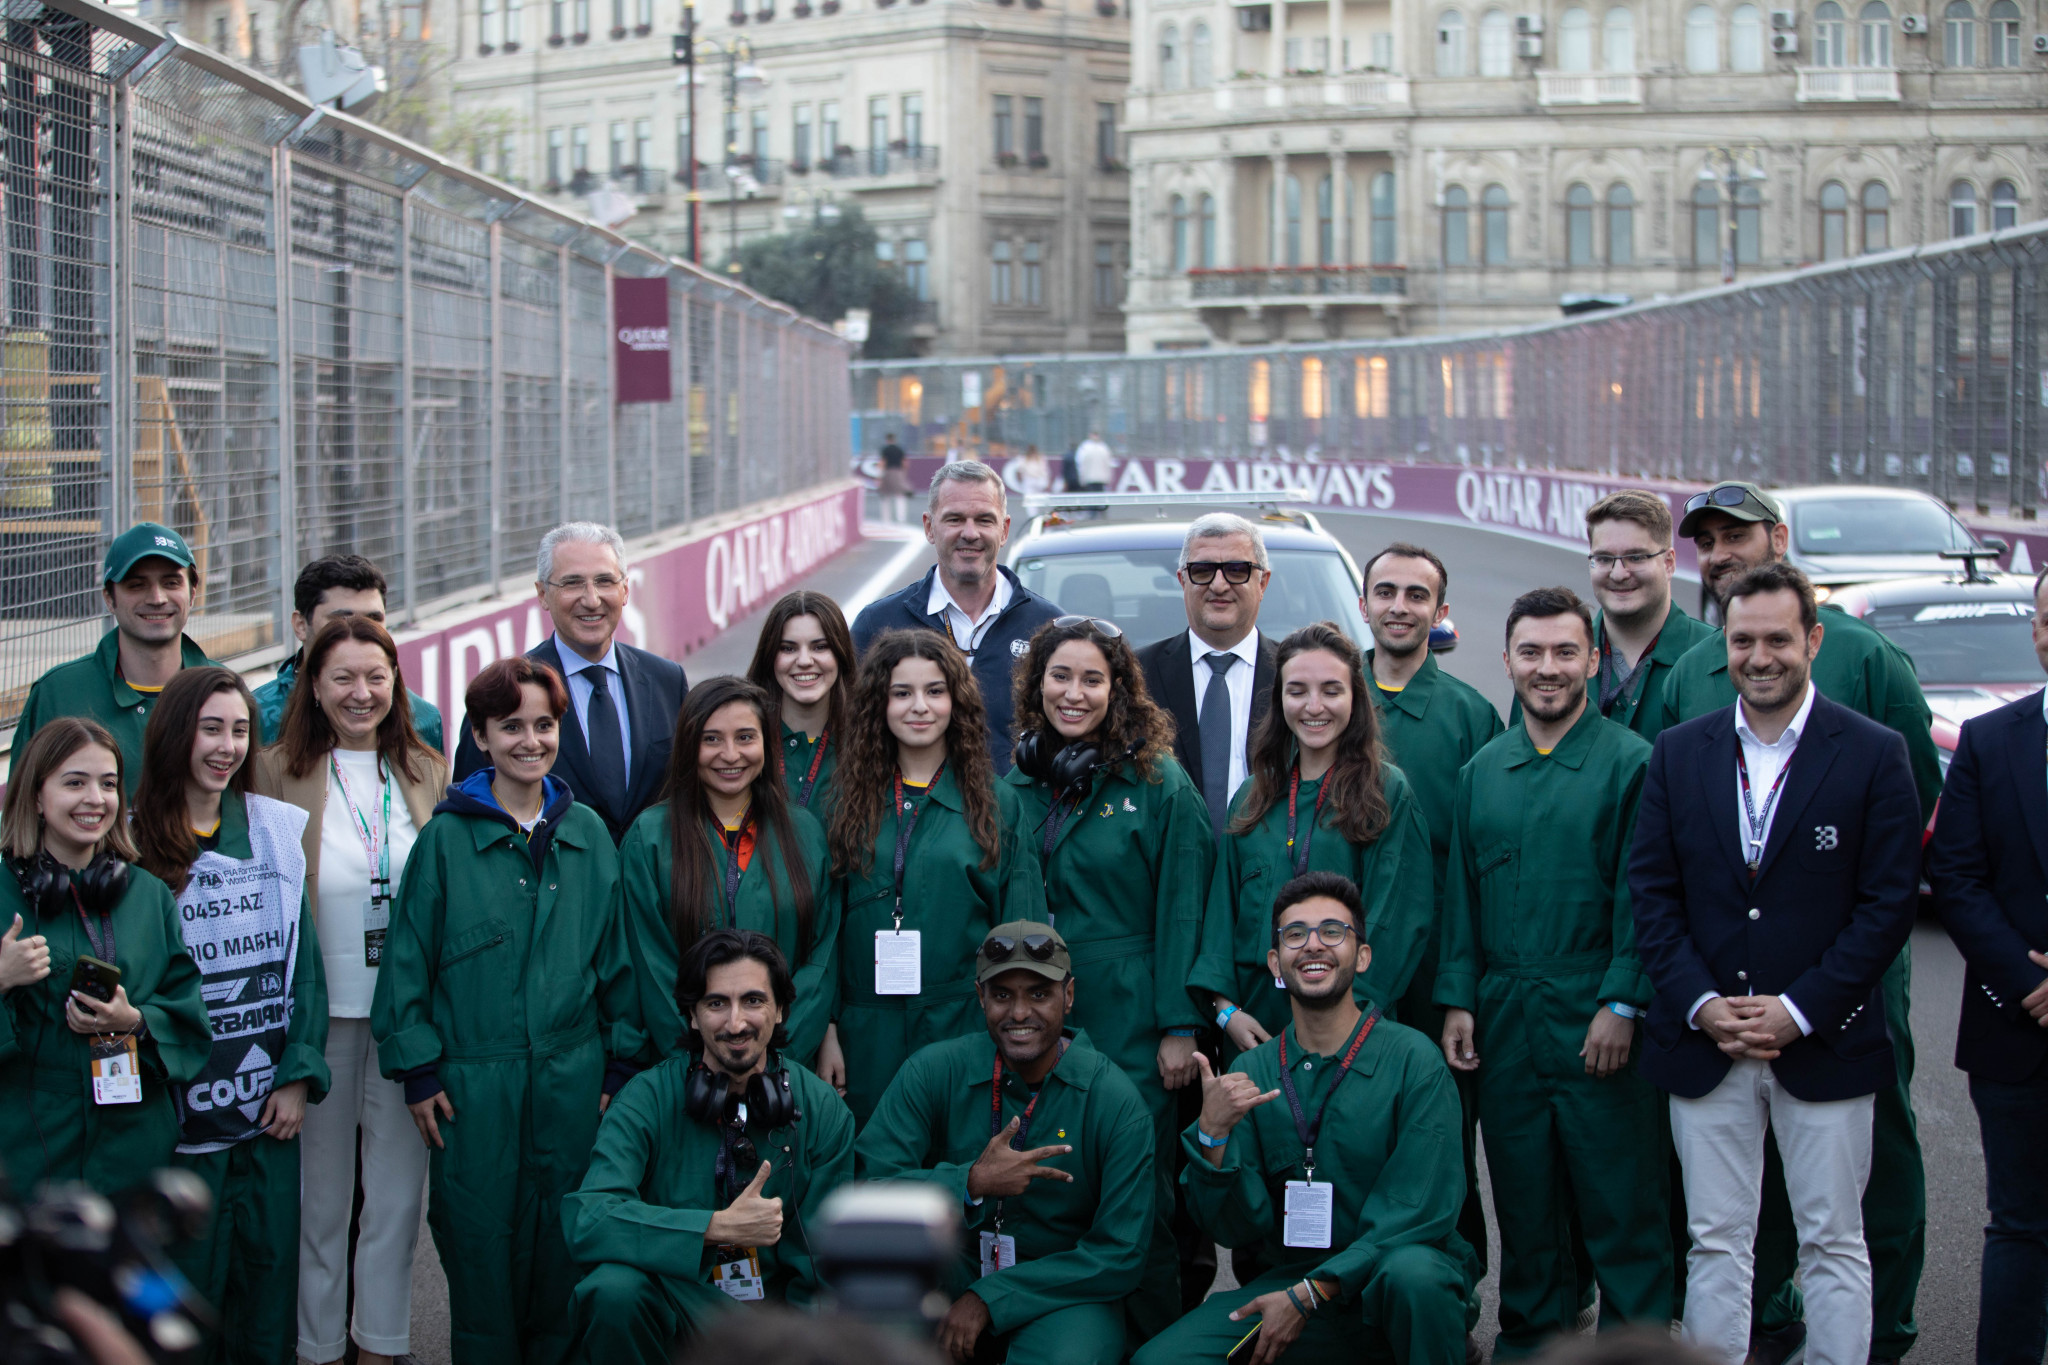 Representatives from Baku City Circuit confirmed the body's commitment to the environment as the Azerbaijan Grand Prix signed on to Formula One's net zero carbon by 2030 initiative ©Getty Images